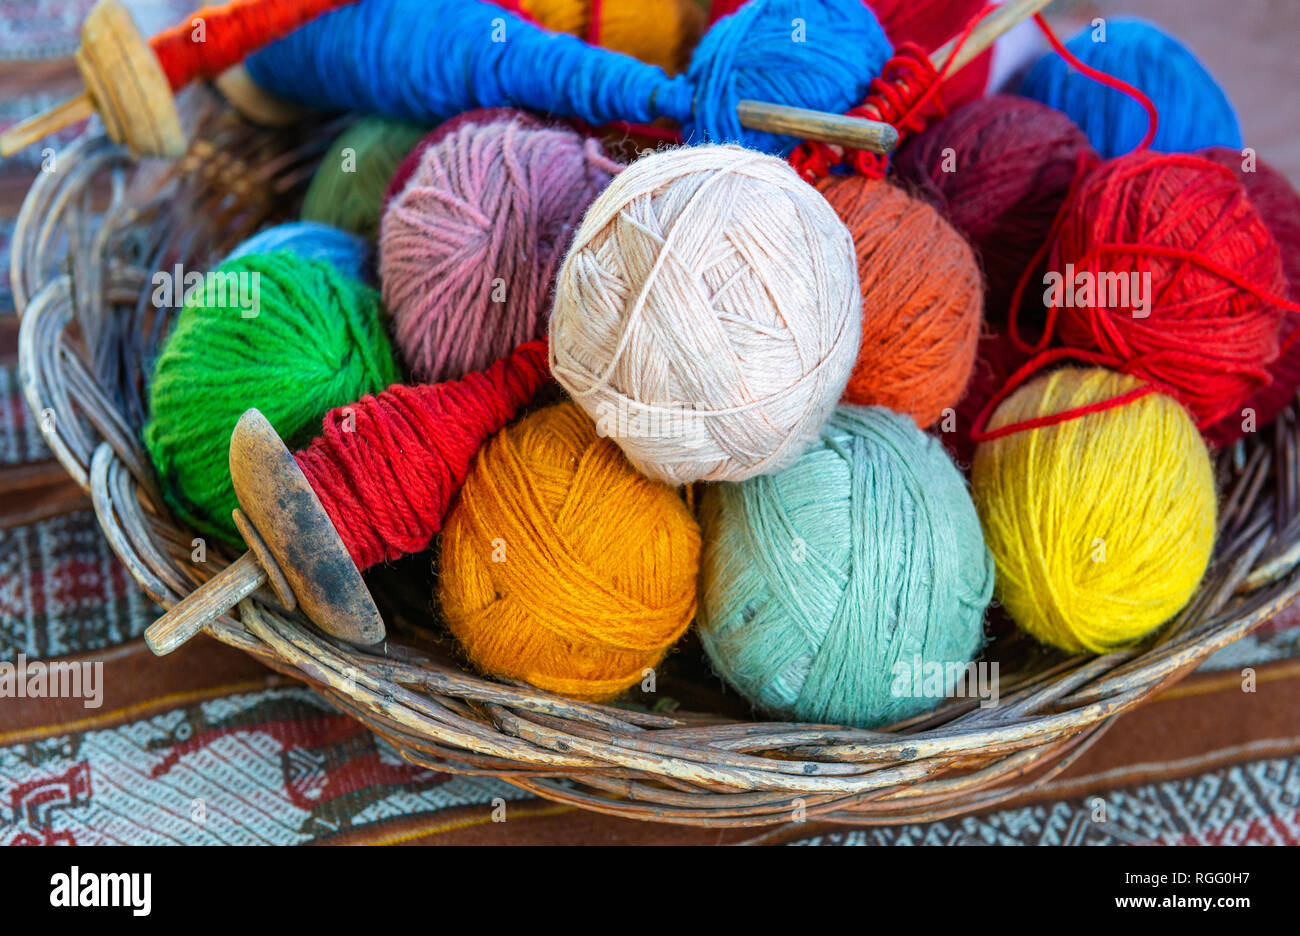 Basket with colourful alpaca wool yarn balls and spinning spindles in a textile production center in Cusco, Peru. Stock Photo